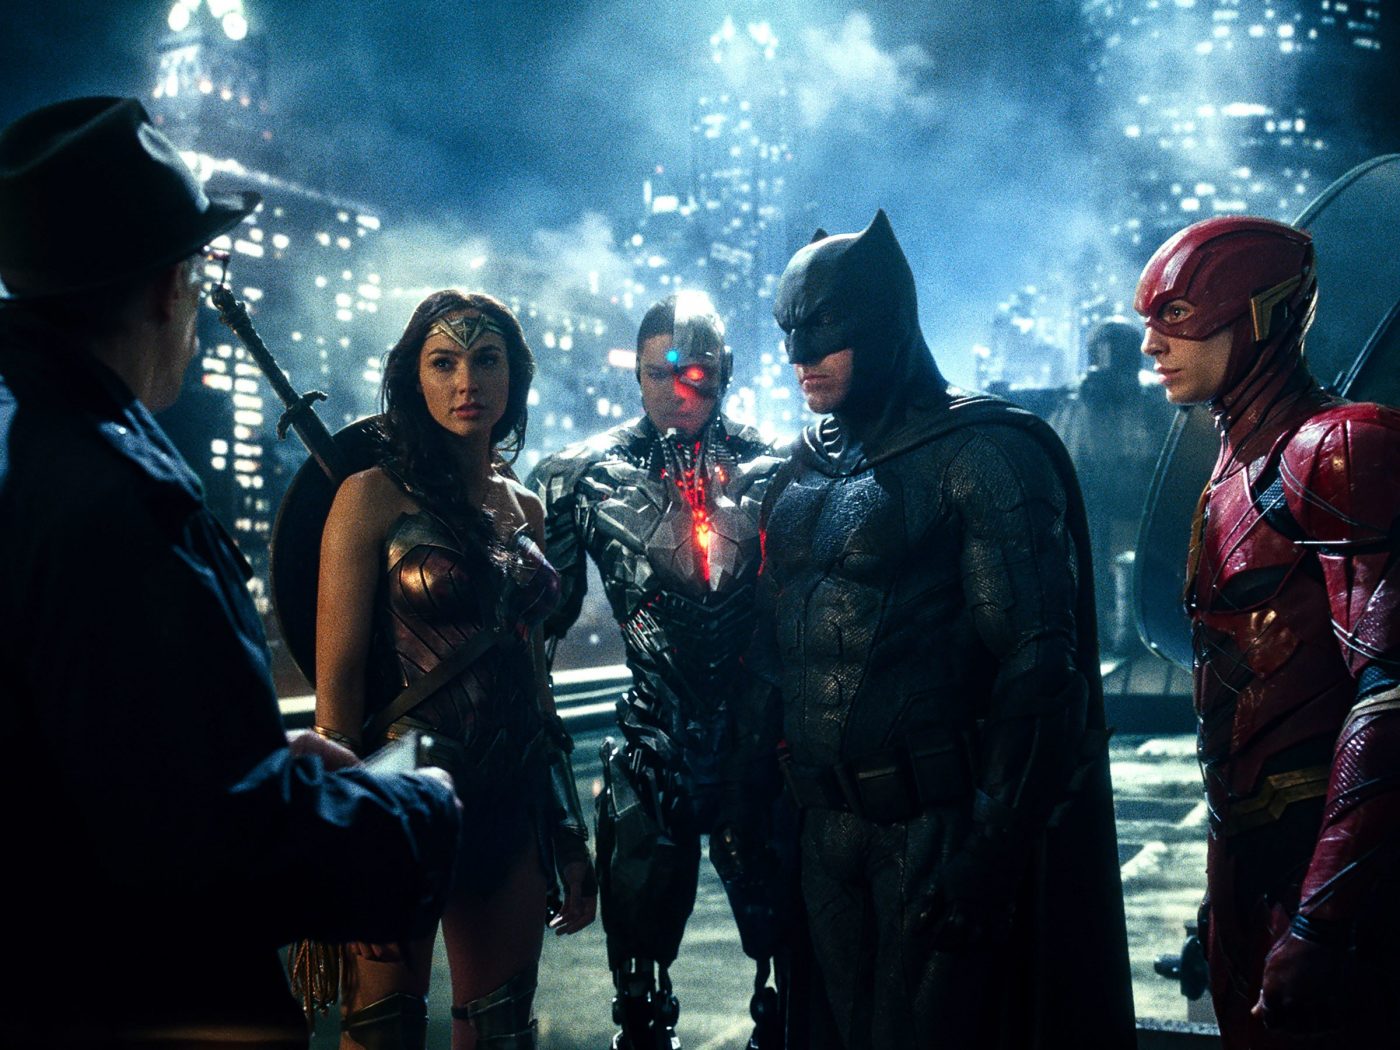 Watch Justice League's two post-credit scenes here